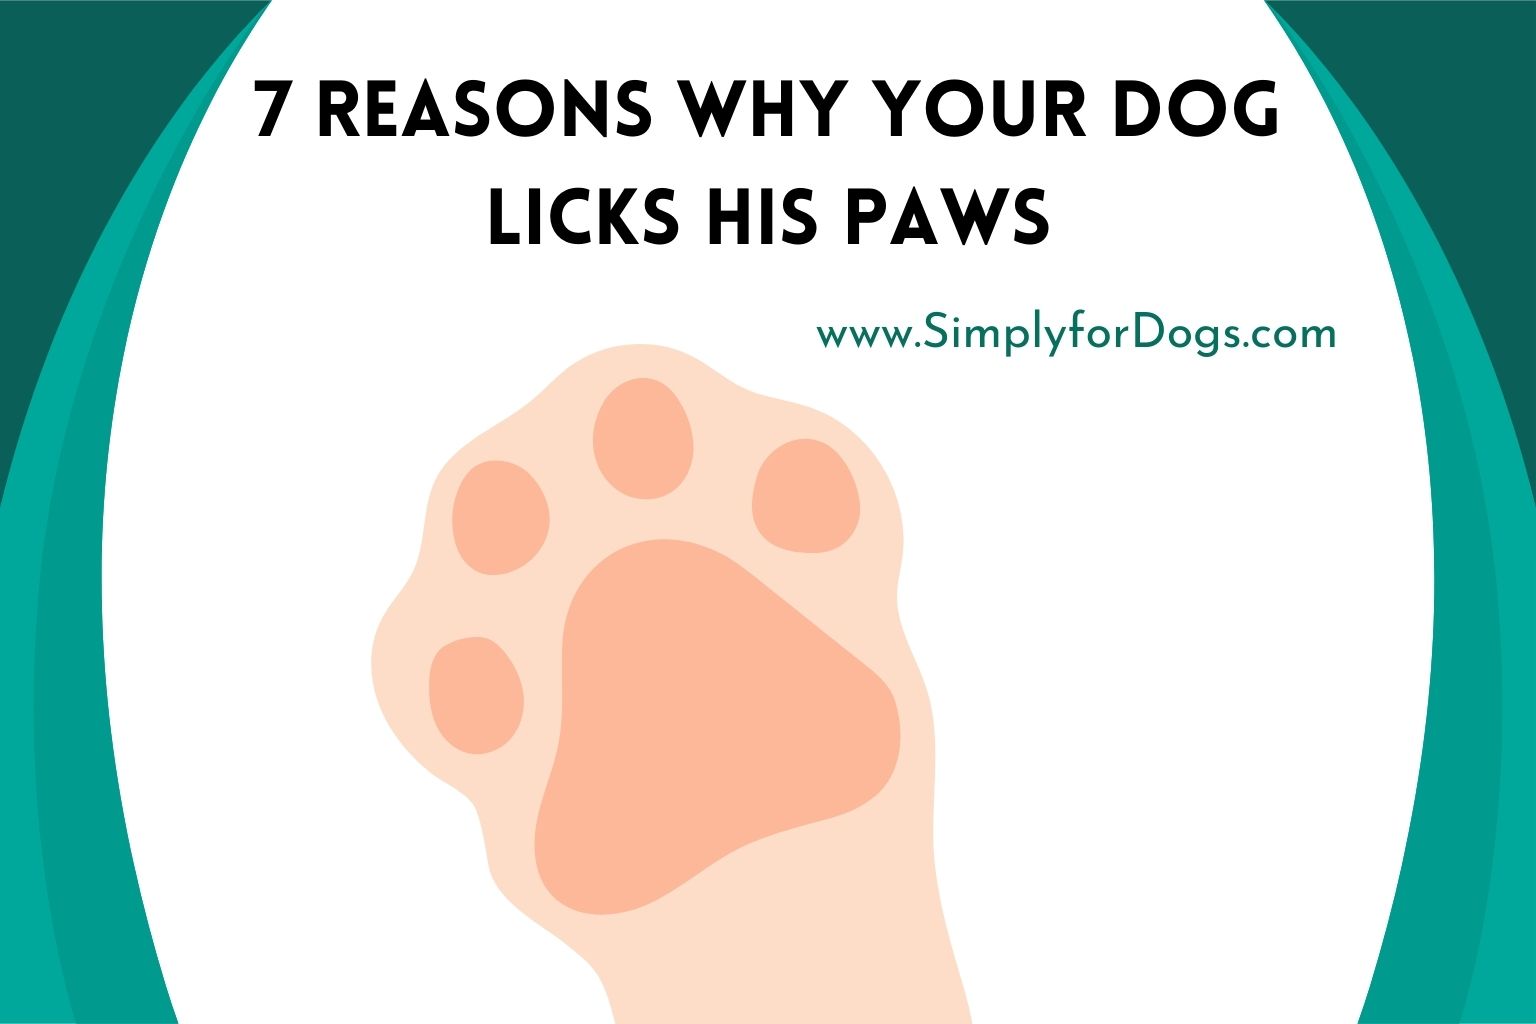 7 Reasons Why Your Dog Licks His Paws